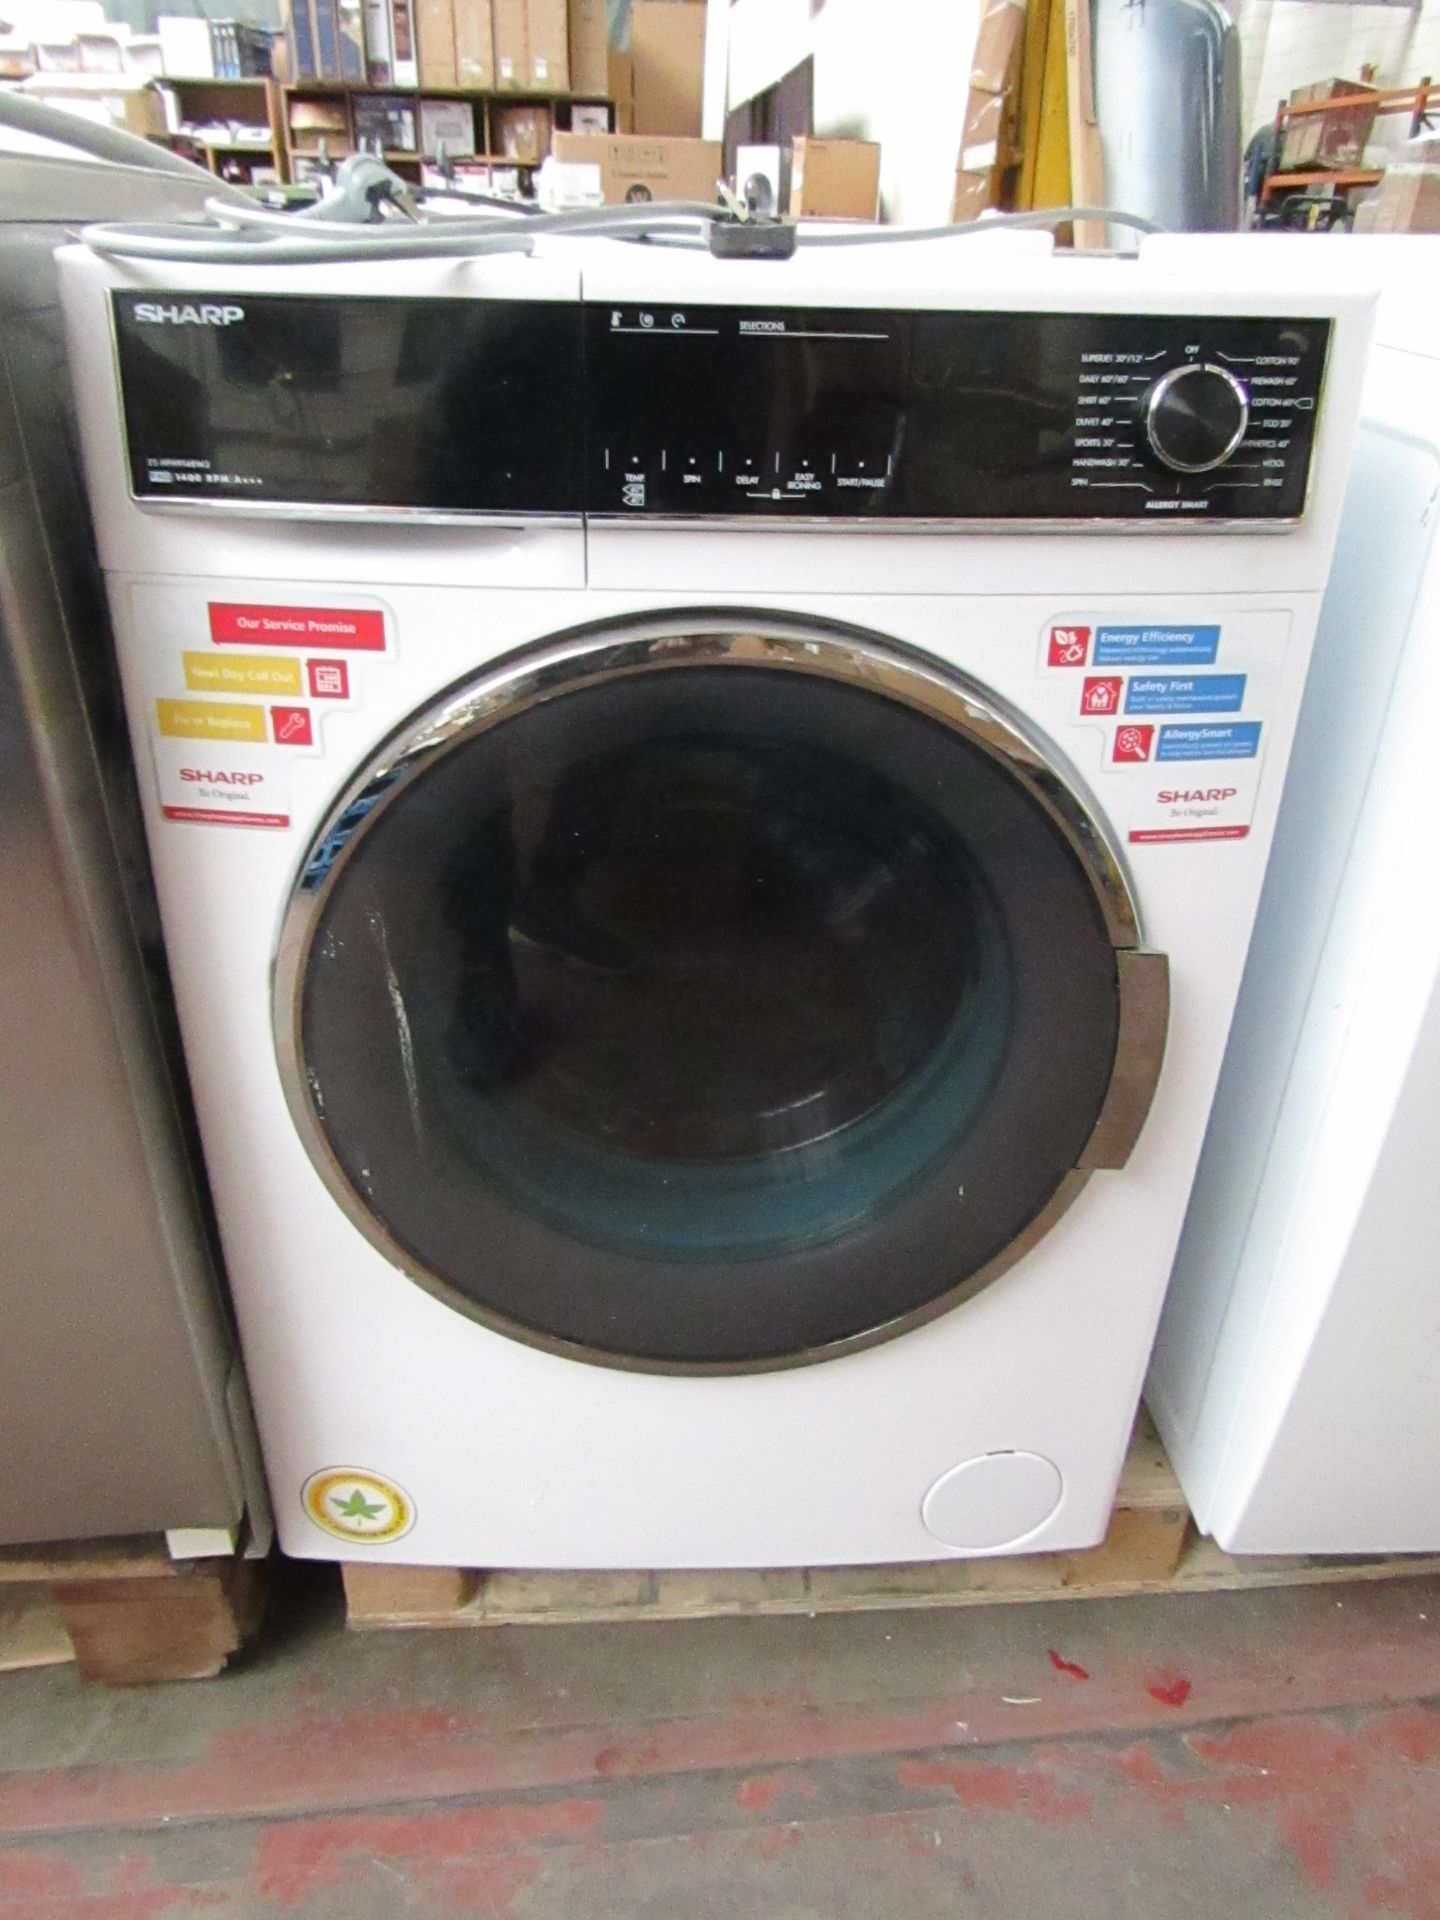 Sharp 9kg 1400 rpm a+++ washing machine, powers on and spins.